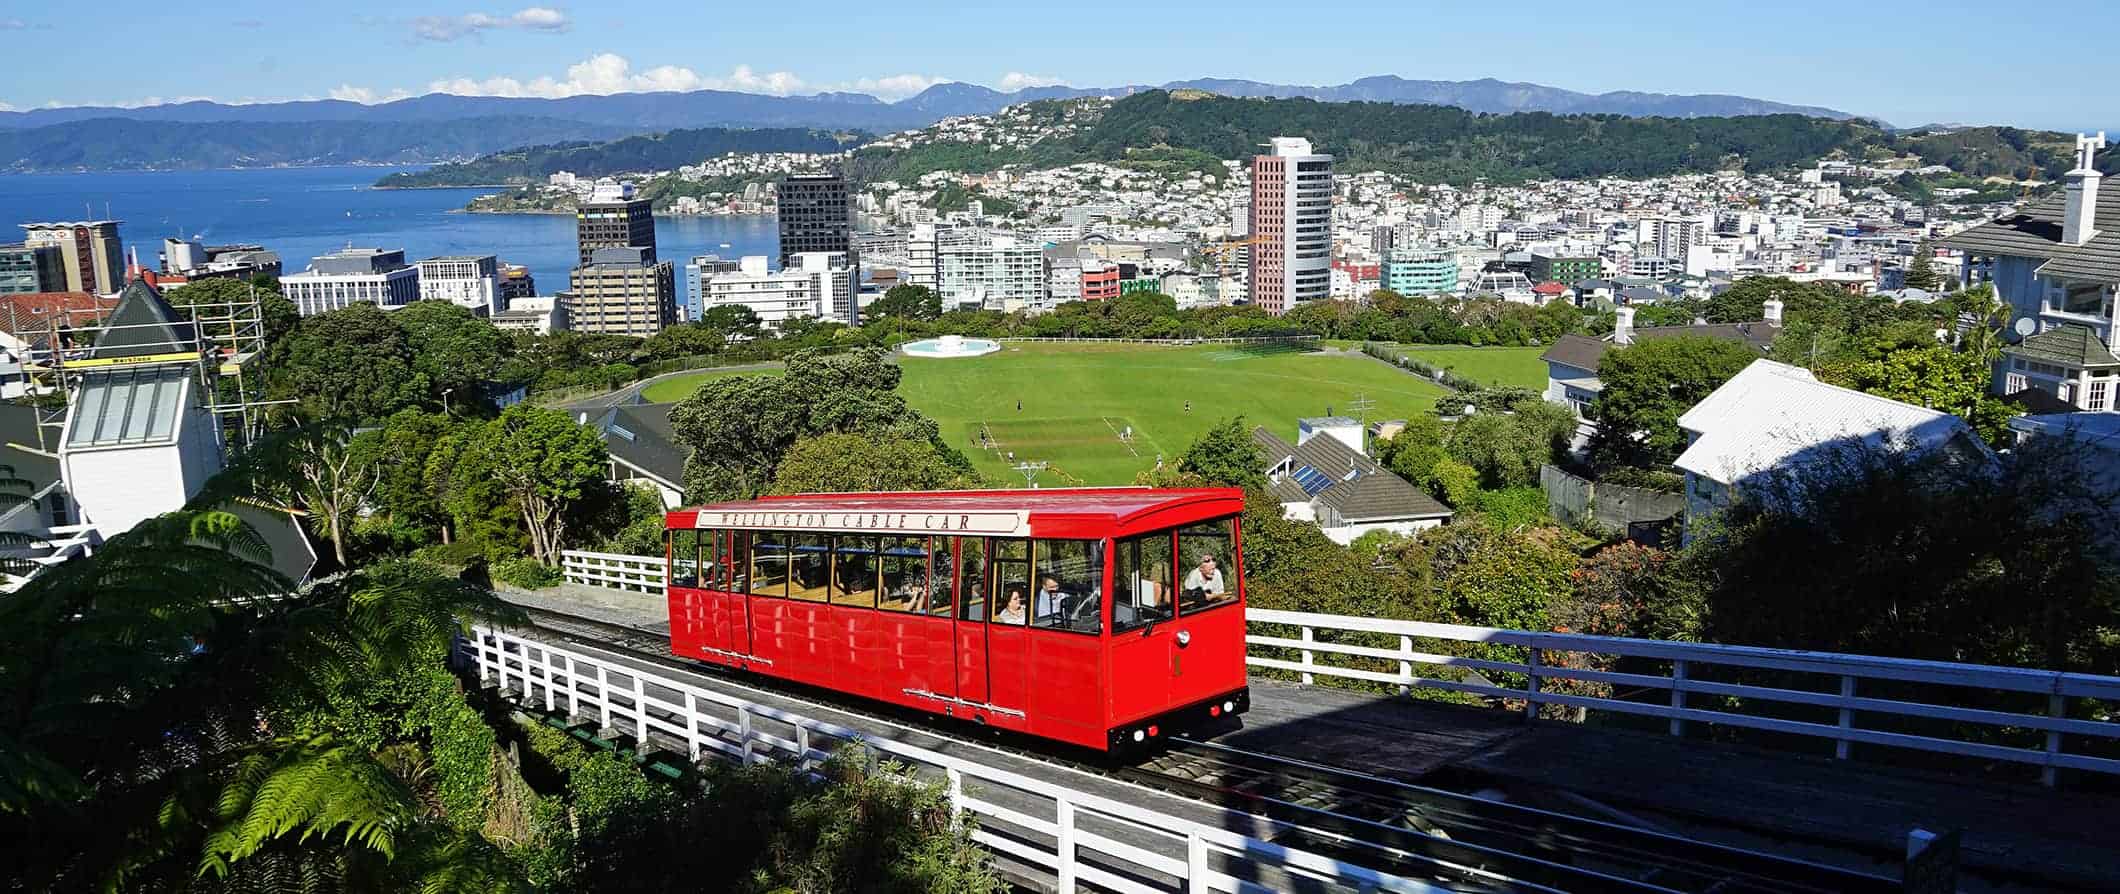 The red Wellington cable car going up the hillside with the city of Wellington, New Zealand in the background.